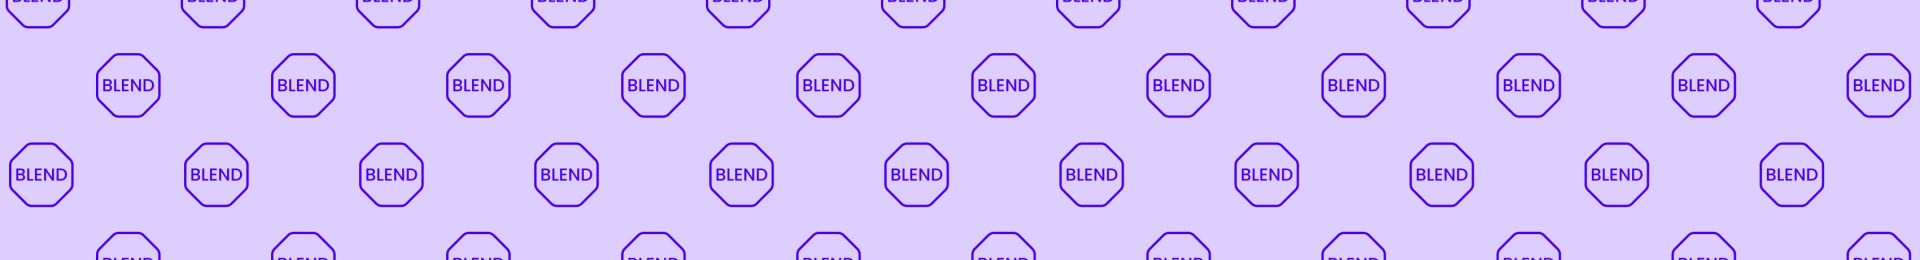 Blend Products